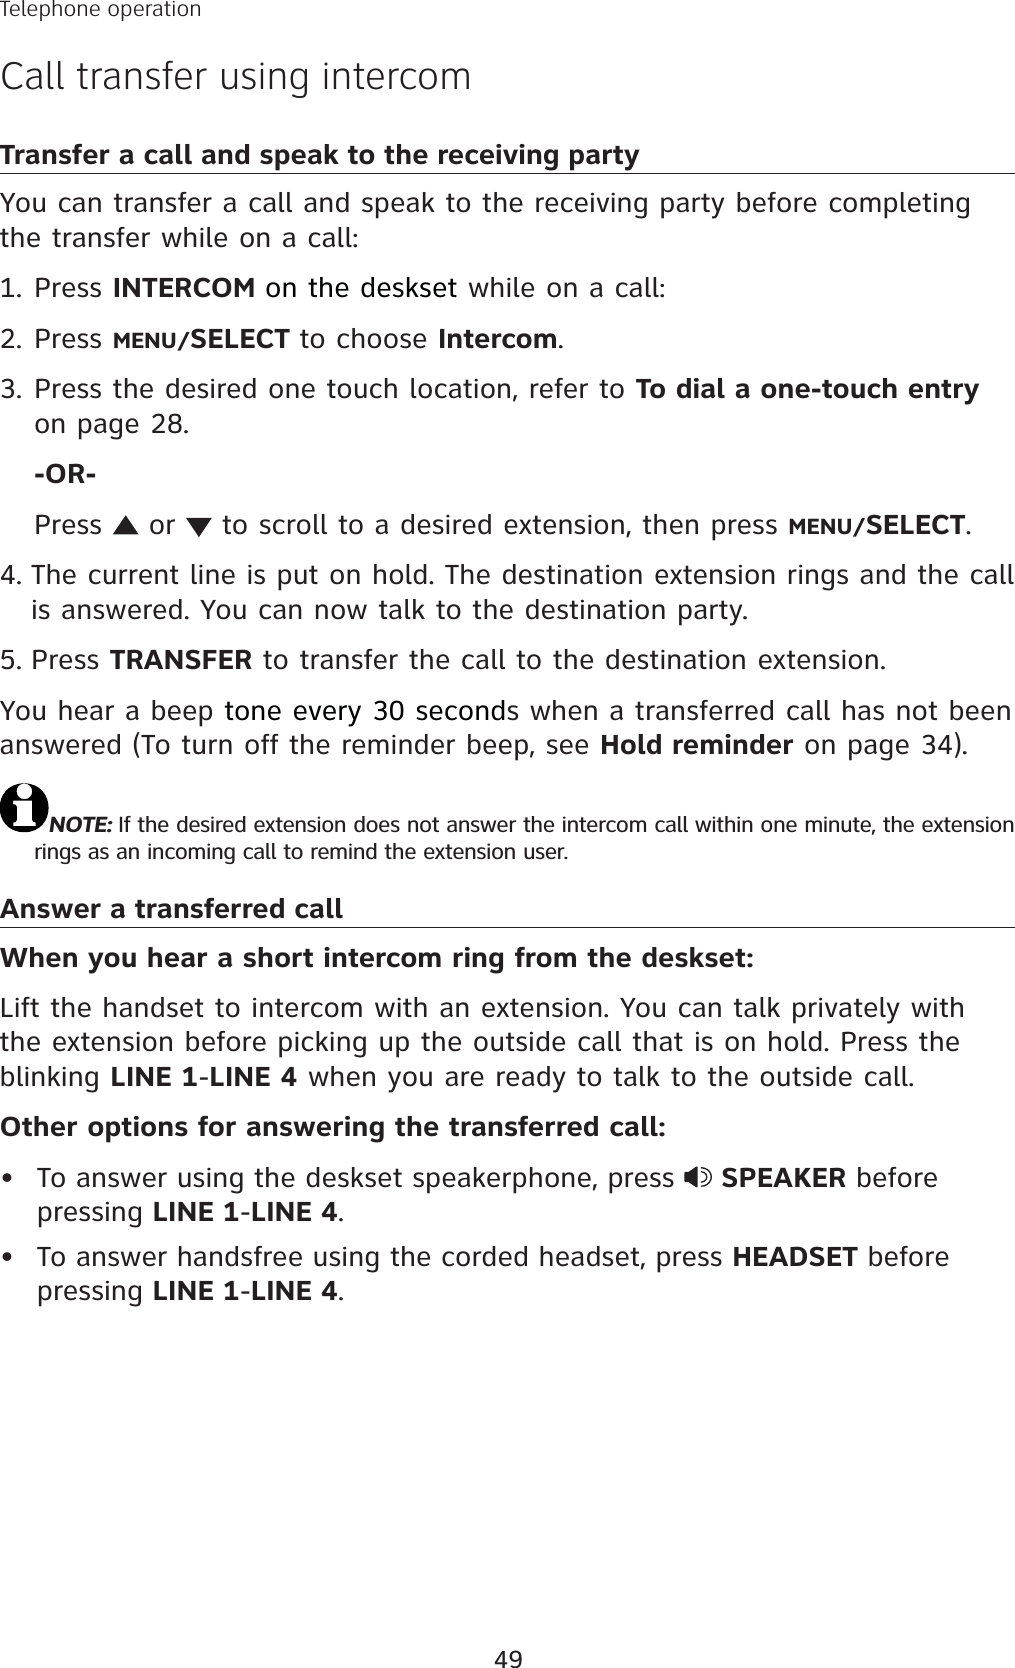 49Transfer a call and speak to the receiving partyYou can transfer a call and speak to the receiving party before completing the transfer while on a call:Press INTERCOM on the deskset while on a call:Press MENU/SELECT to choose Intercom.Press the desired one touch location, refer to To dial a one-touch entryon page 28.-OR-Press   or   to scroll to a desired extension, then press MENU/SELECT.The current line is put on hold. The destination extension rings and the call is answered. You can now talk to the destination party. Press TRANSFER to transfer the call to the destination extension.You hear a beep tone every 30 seconds when a transferred call has not been answered (To turn off the reminder beep, see Hold reminder on page 34).NOTE: If the desired extension does not answer the intercom call within one minute, the extension rings as an incoming call to remind the extension user. Answer a transferred callWhen you hear a short intercom ring from the deskset:Lift the handset to intercom with an extension. You can talk privately with the extension before picking up the outside call that is on hold. Press the blinking LINE 1-LINE 4 when you are ready to talk to the outside call. Other options for answering the transferred call:To answer using the deskset speakerphone, press  SPEAKER before pressing LINE 1-LINE 4.To answer handsfree using the corded headset, press HEADSET before pressing LINE 1-LINE 4.1.2.3.4.5.••Telephone operationCall transfer using intercom